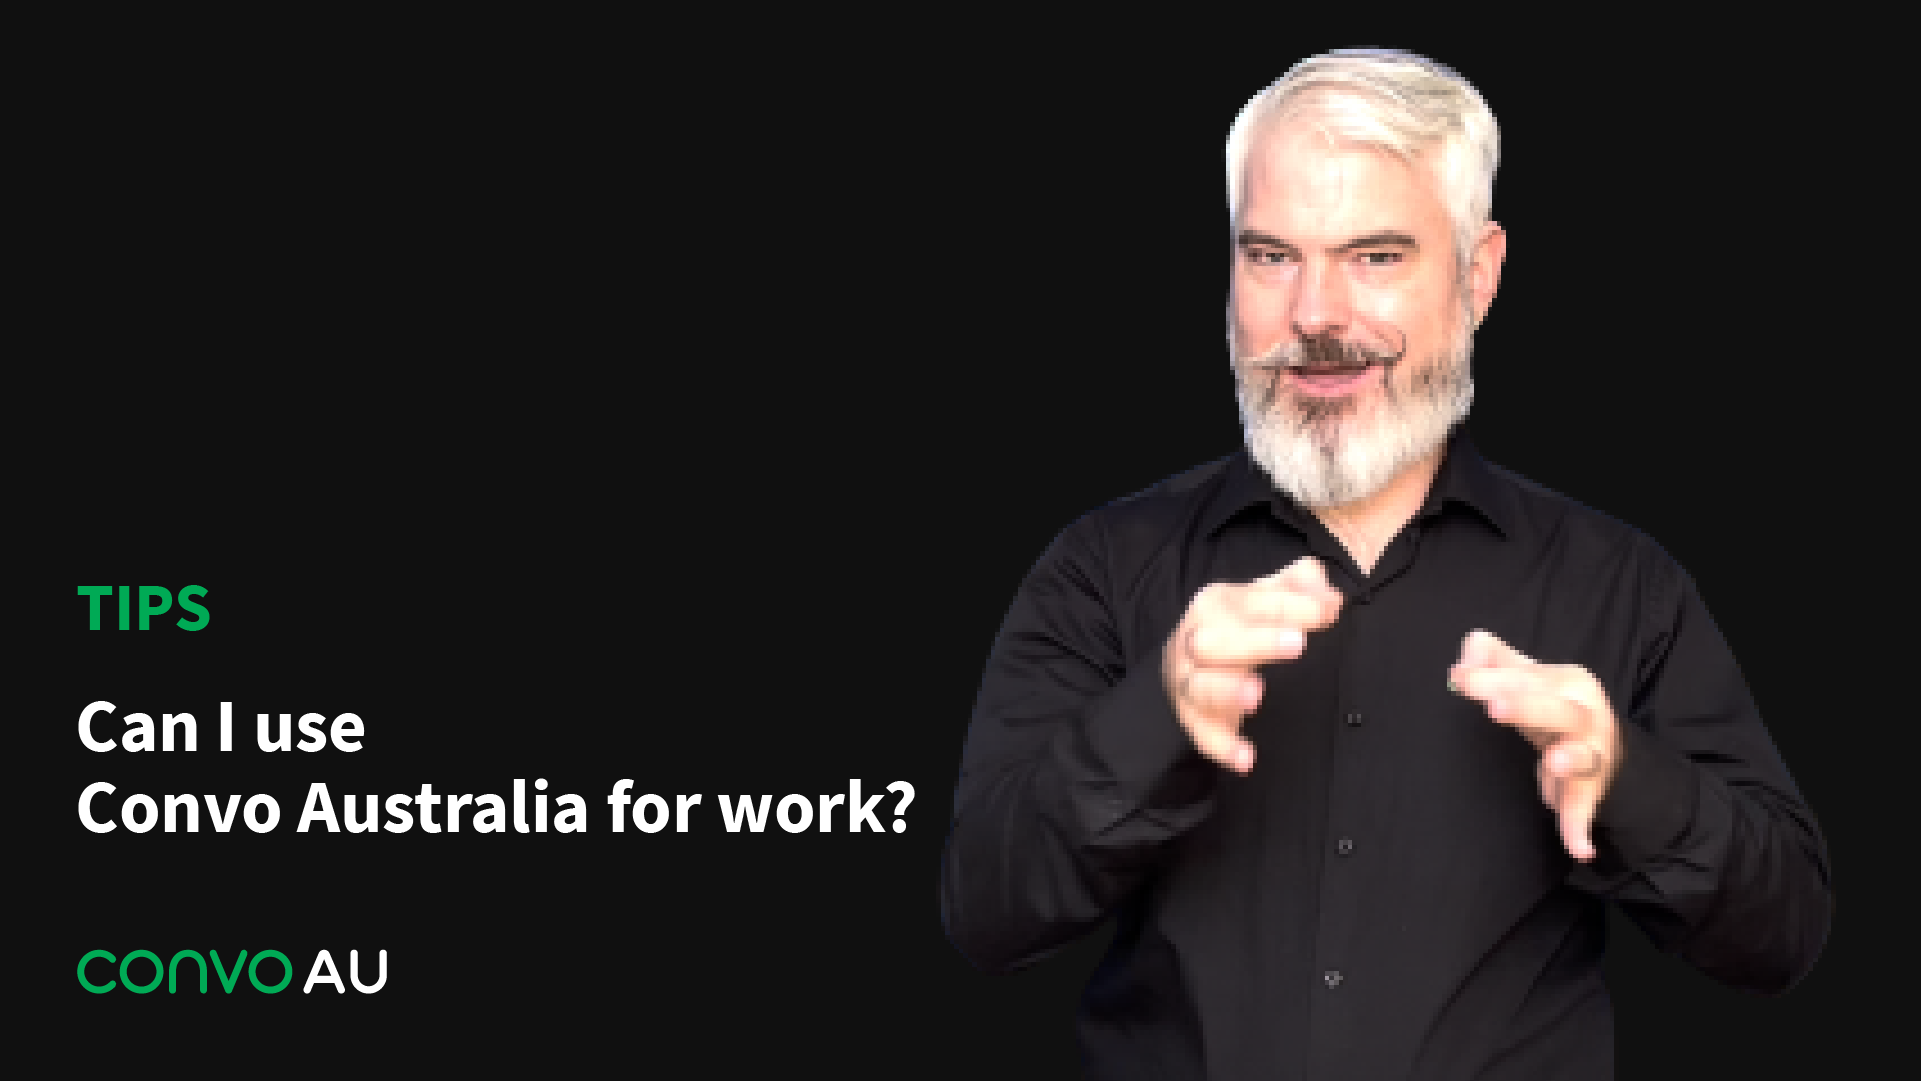 Tips: Can I use Convo australia for work?